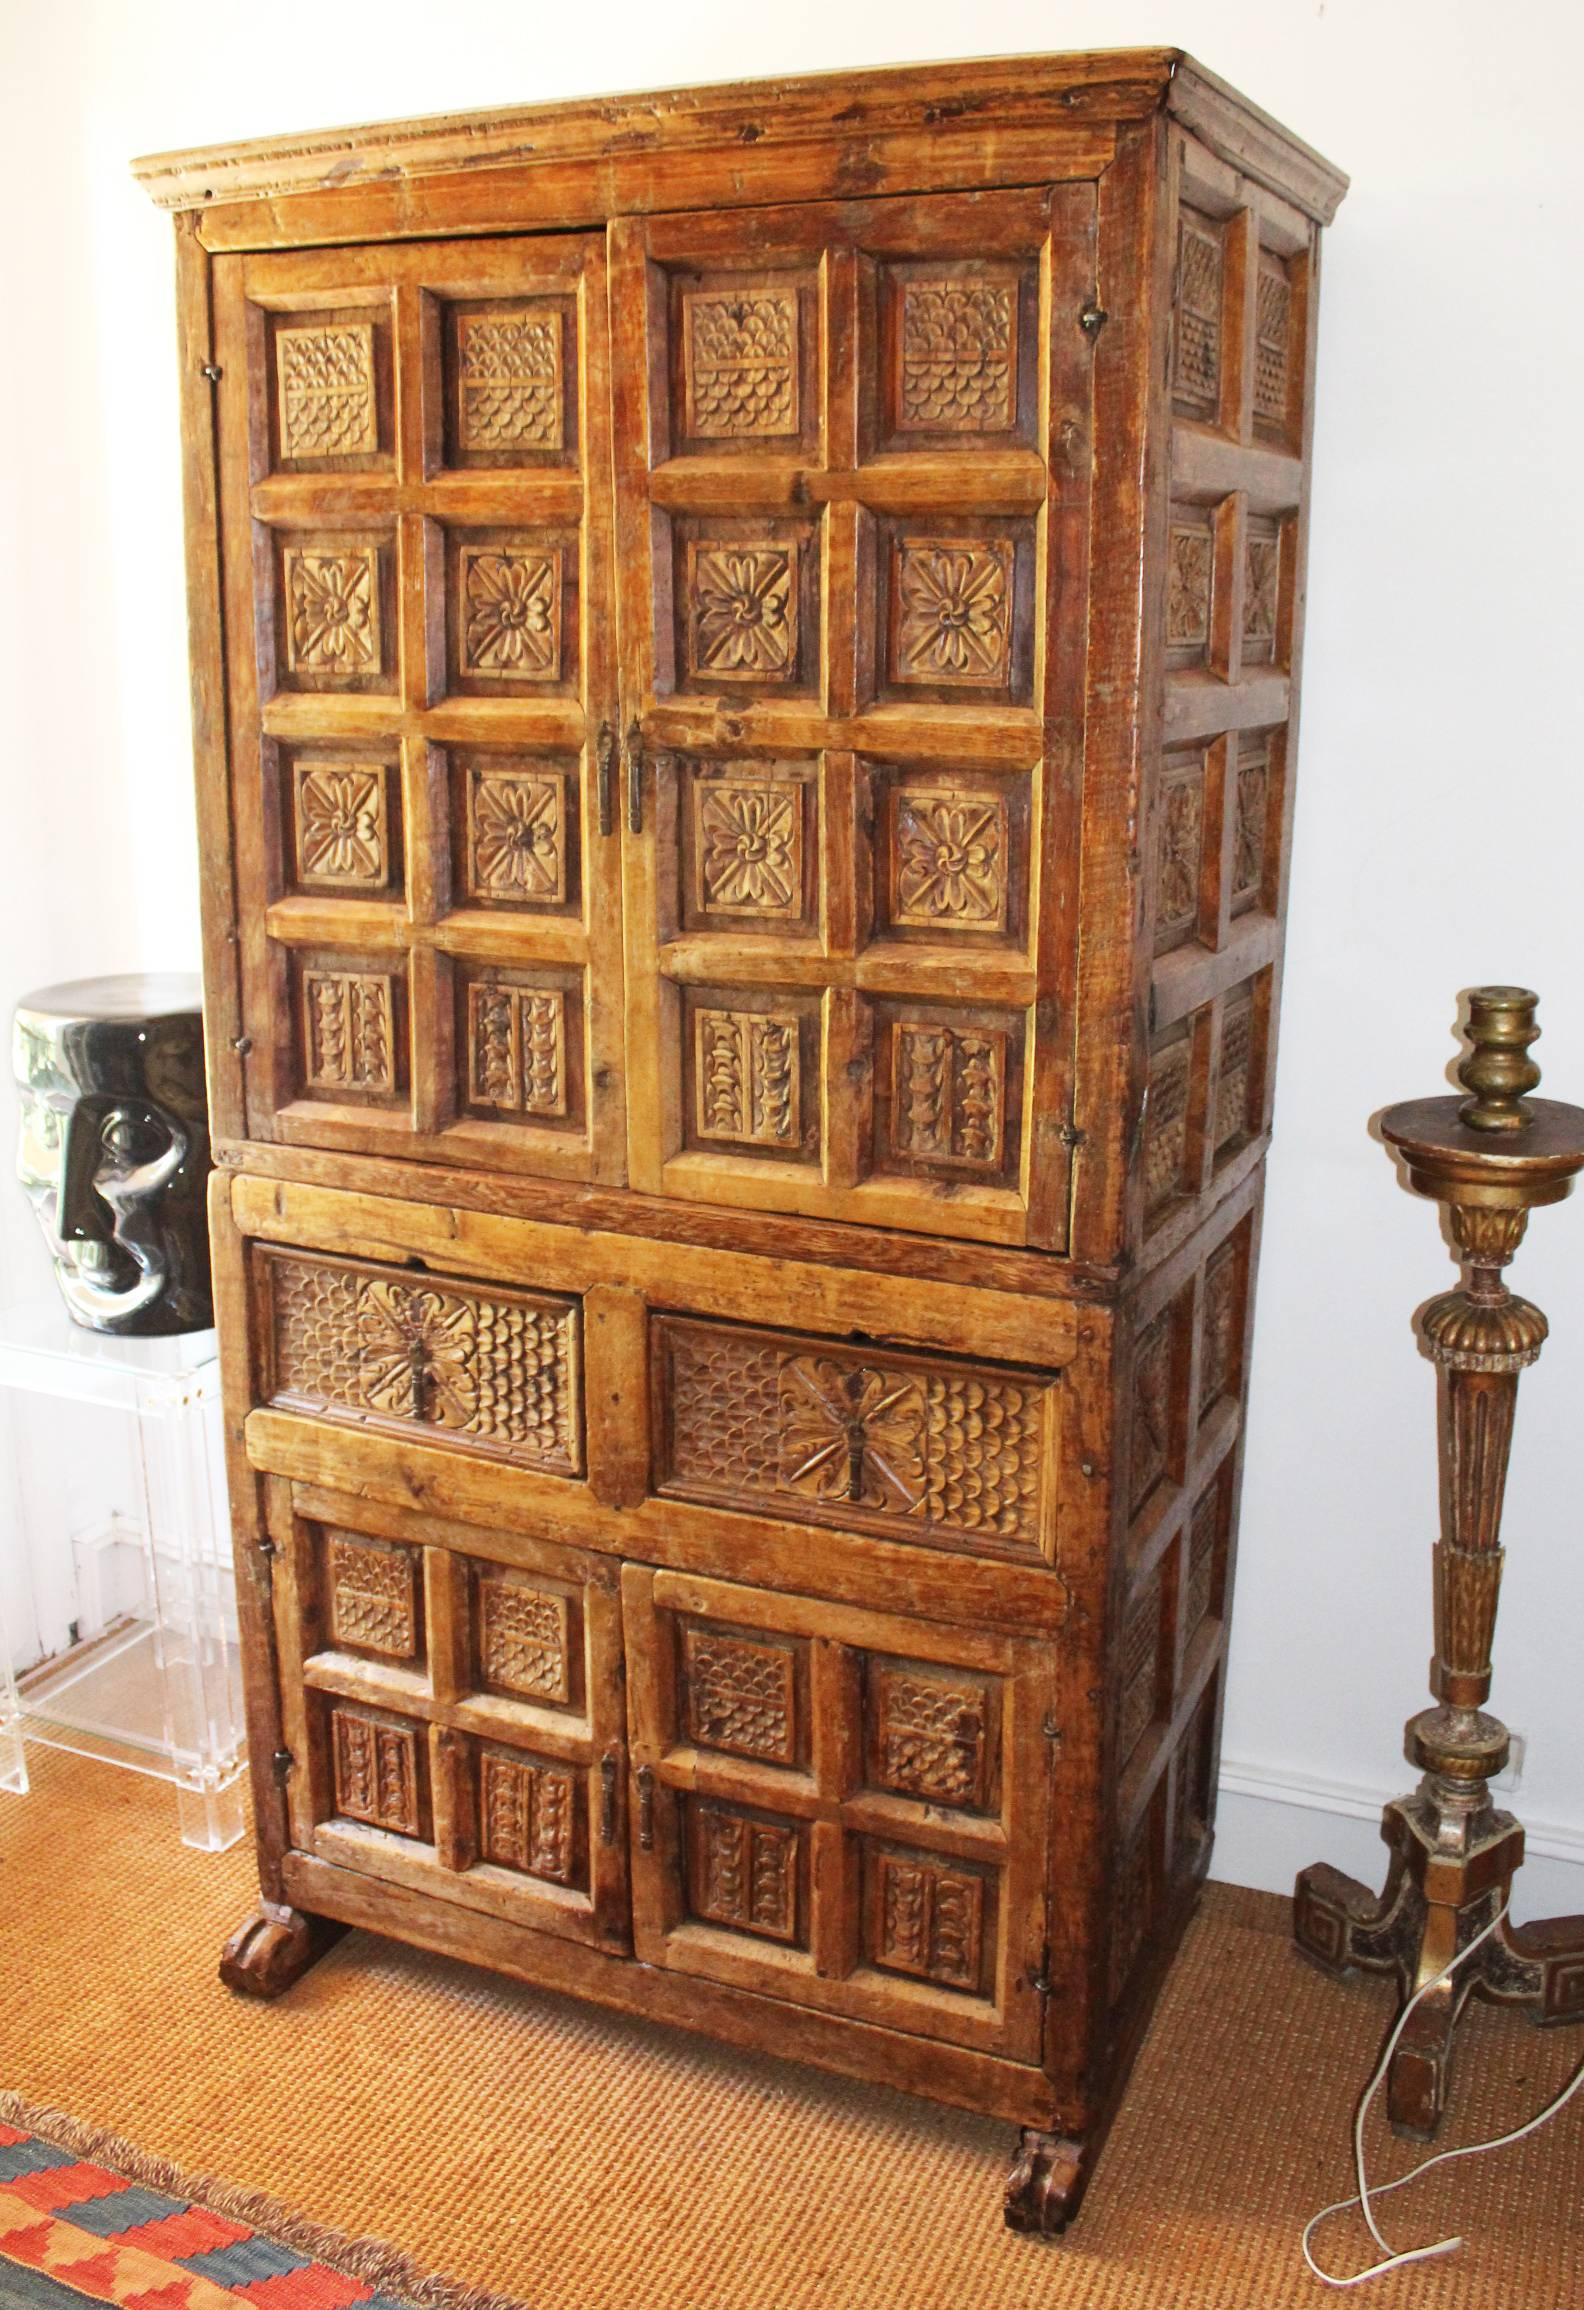 18th century Bolivian fruitwood colonial cabinet, hand-carved with classical geometric patterns and floral motifs, covering the four doors and two drawers and side panels.
  